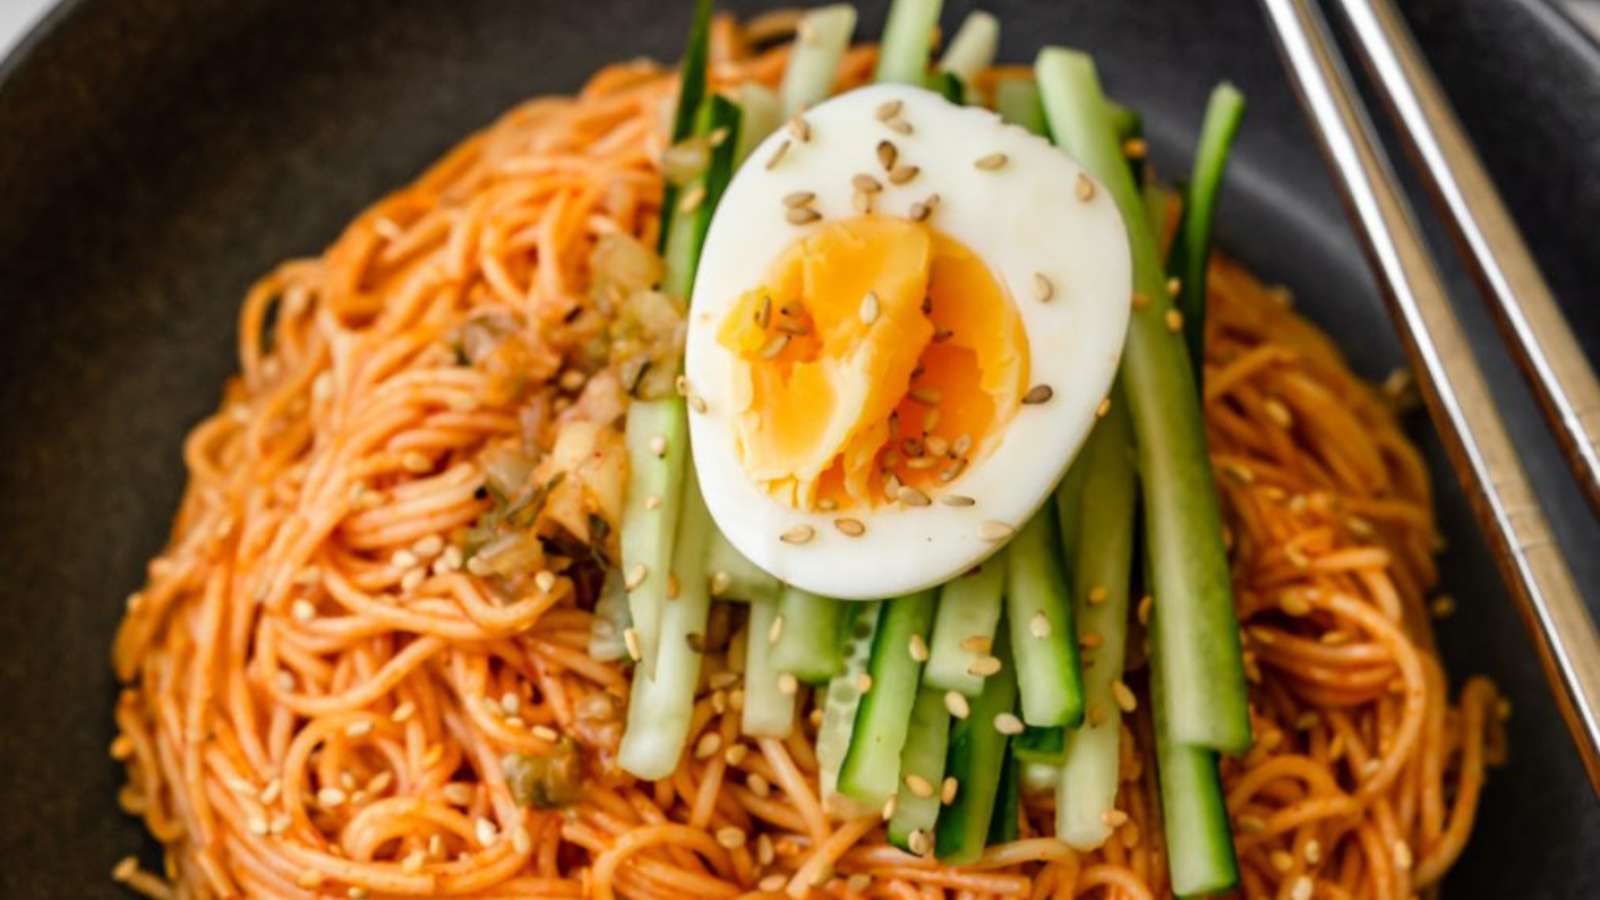 A bowl of noodles with an egg on top (Bibimmyeon).